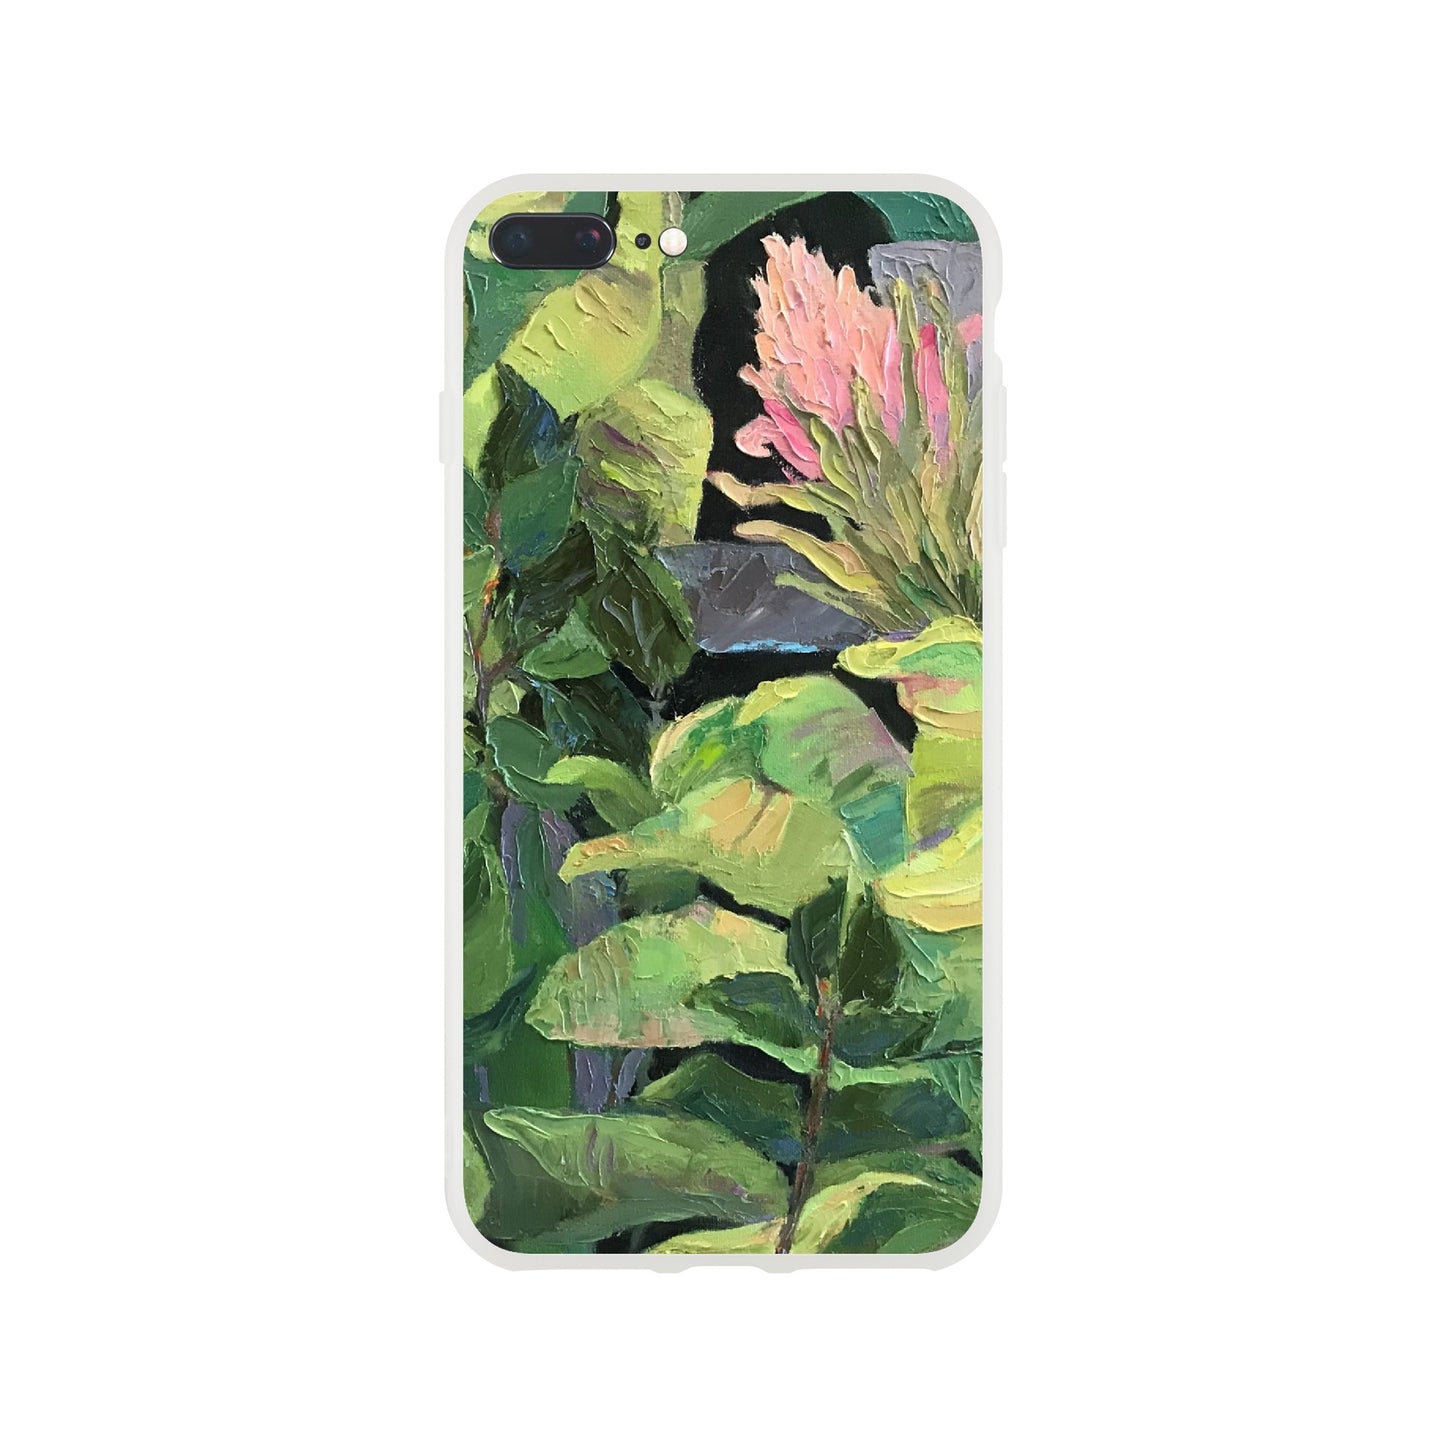 "Bromeliad" Flexi Phone Case for Iphone or Samsung by Barbara Cleary Designs